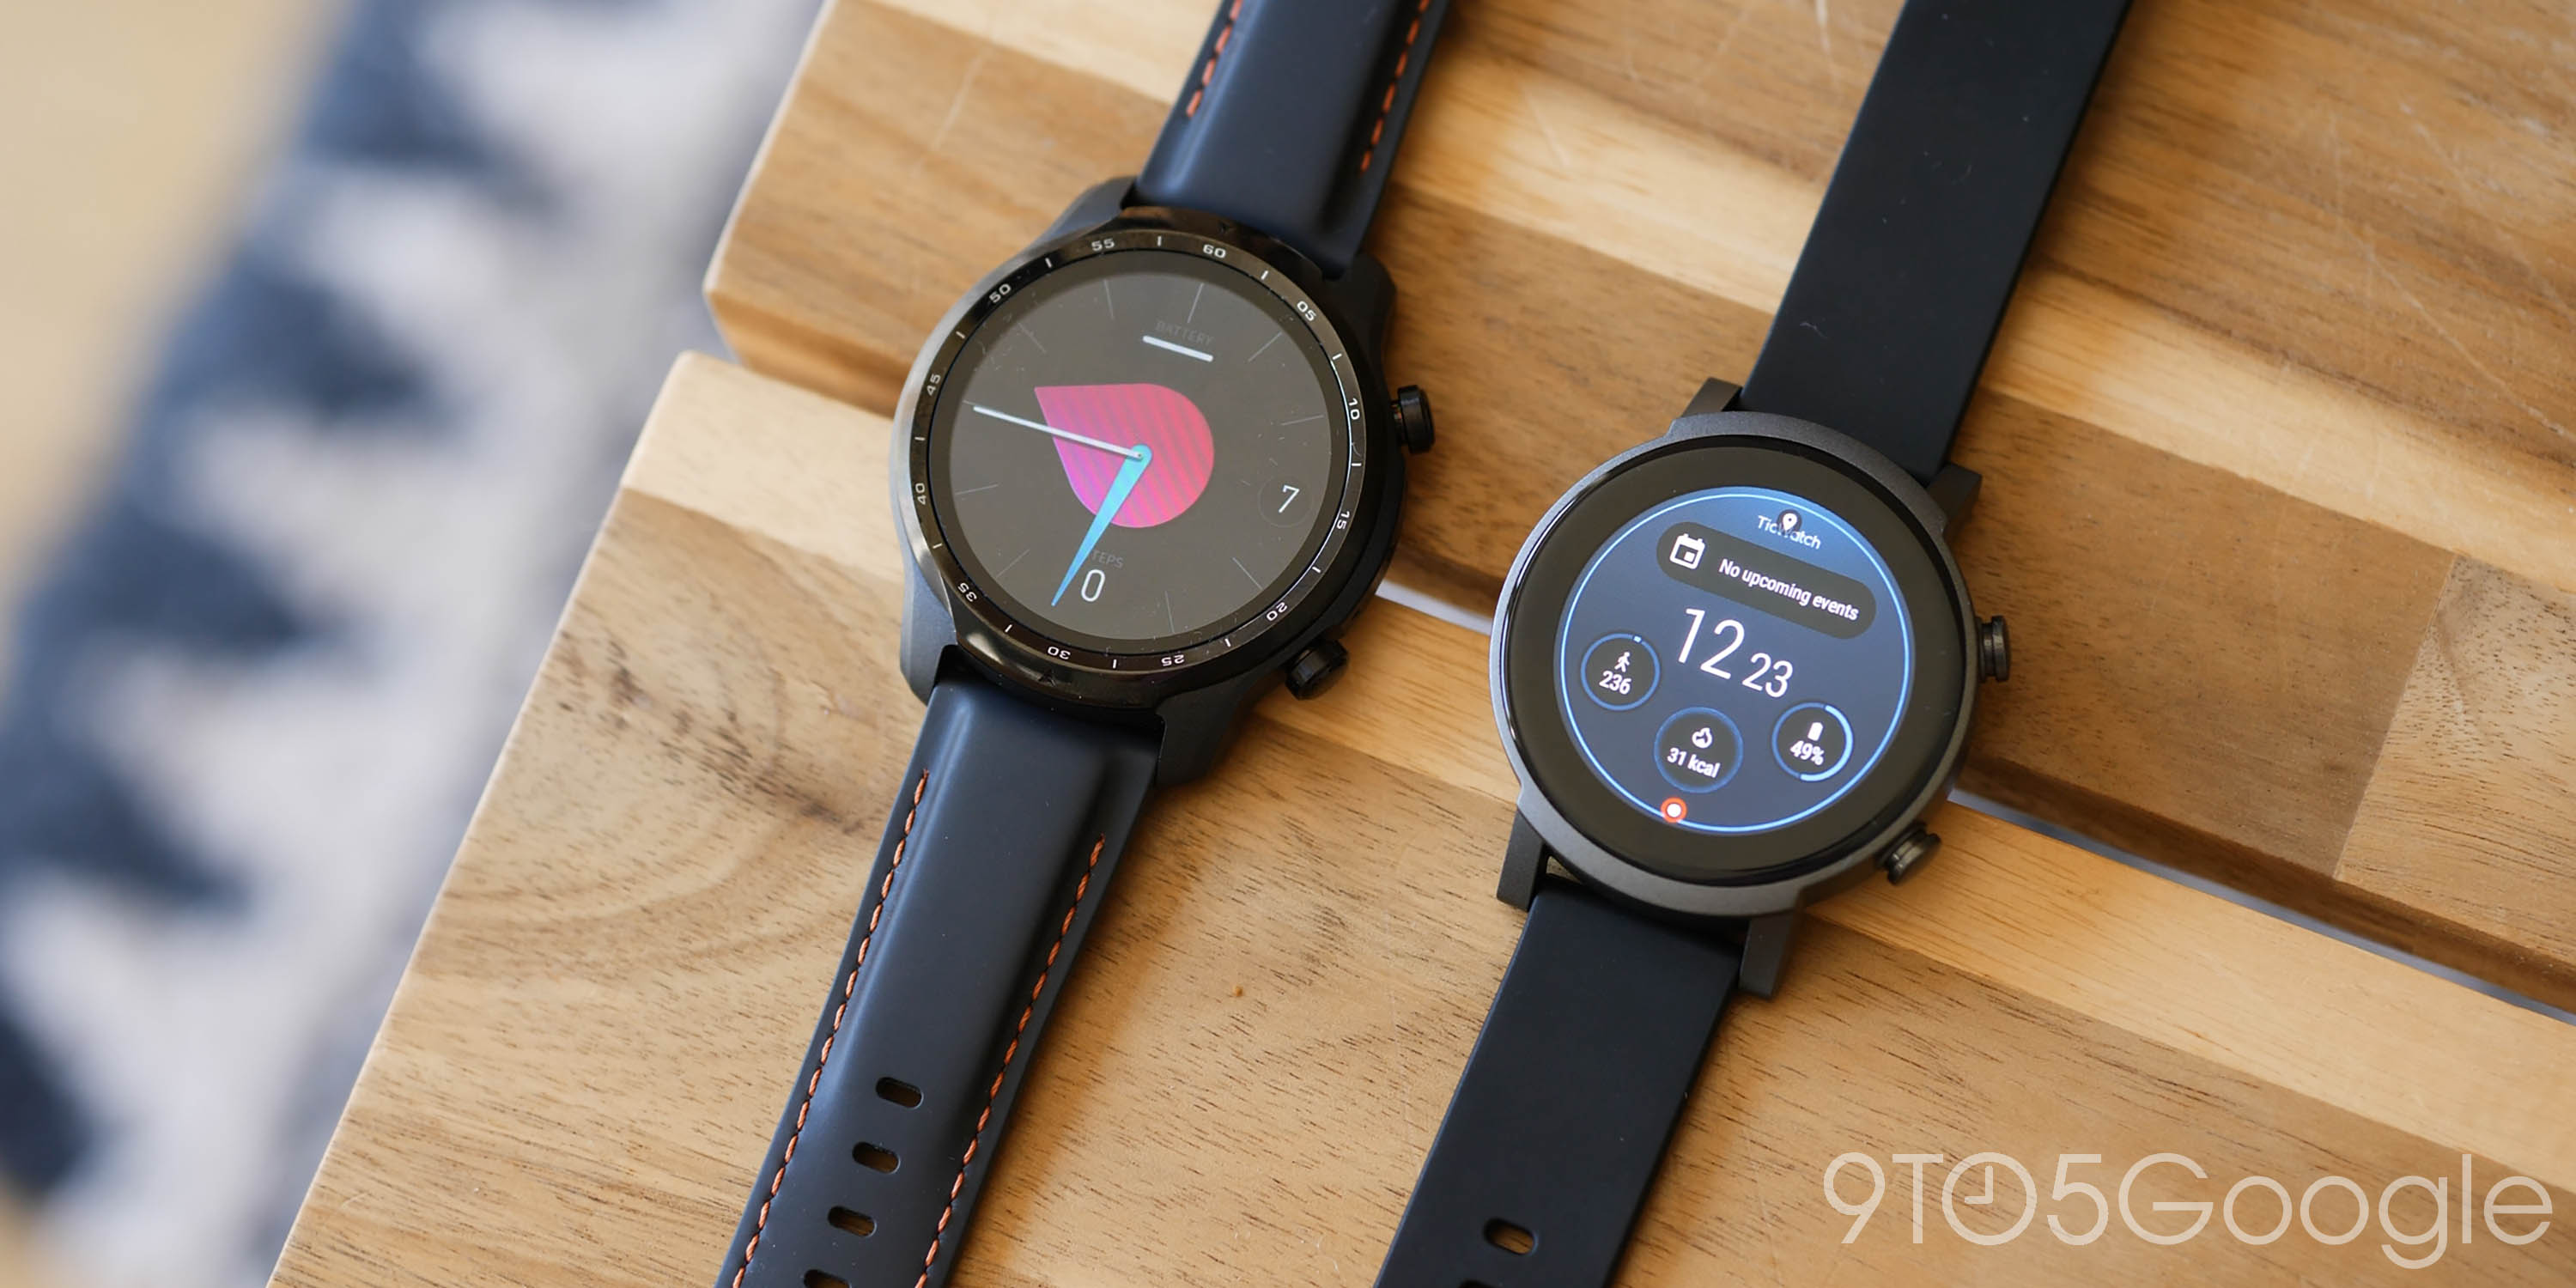 Qualcomm's new smartwatch chips coming to Wear OS, starting with TicWatch  Pro 3 - CNET